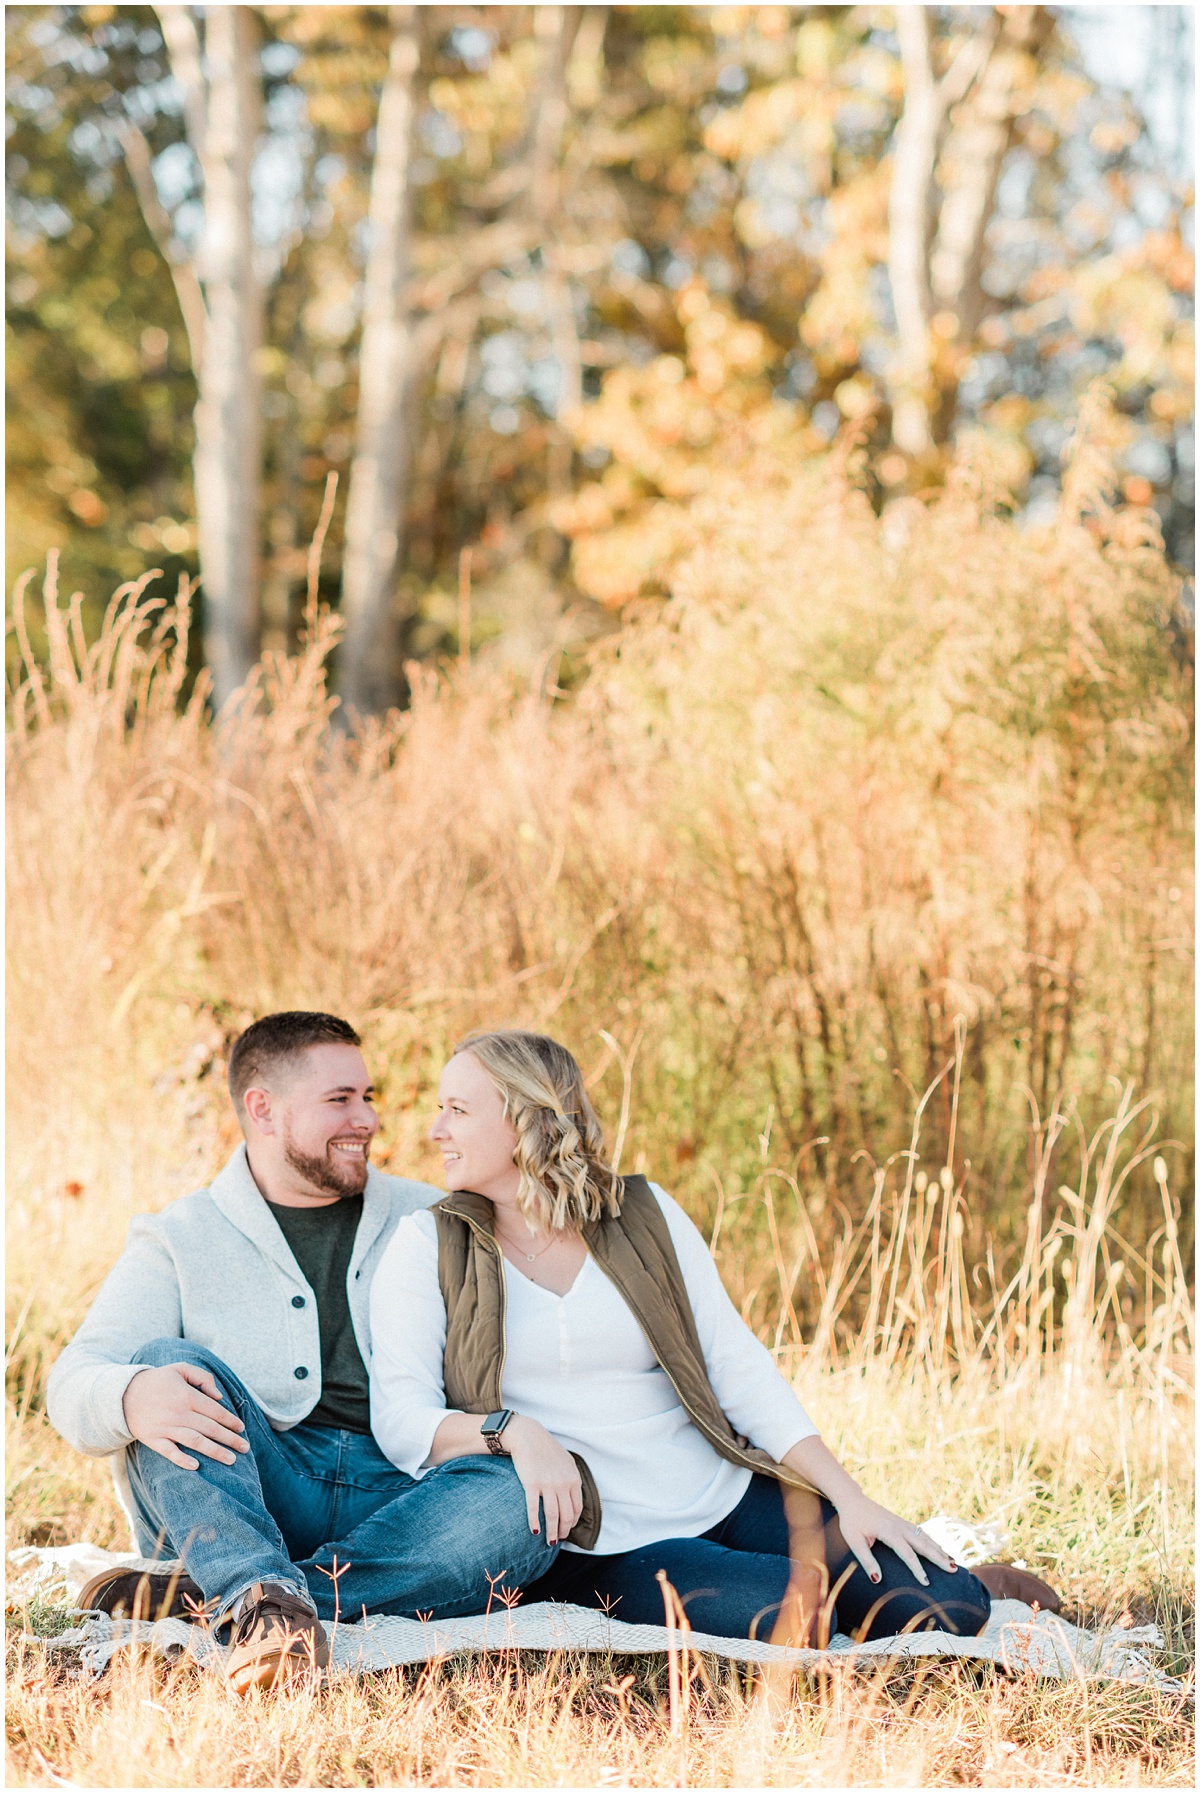 Fall portraits in Greer, SC